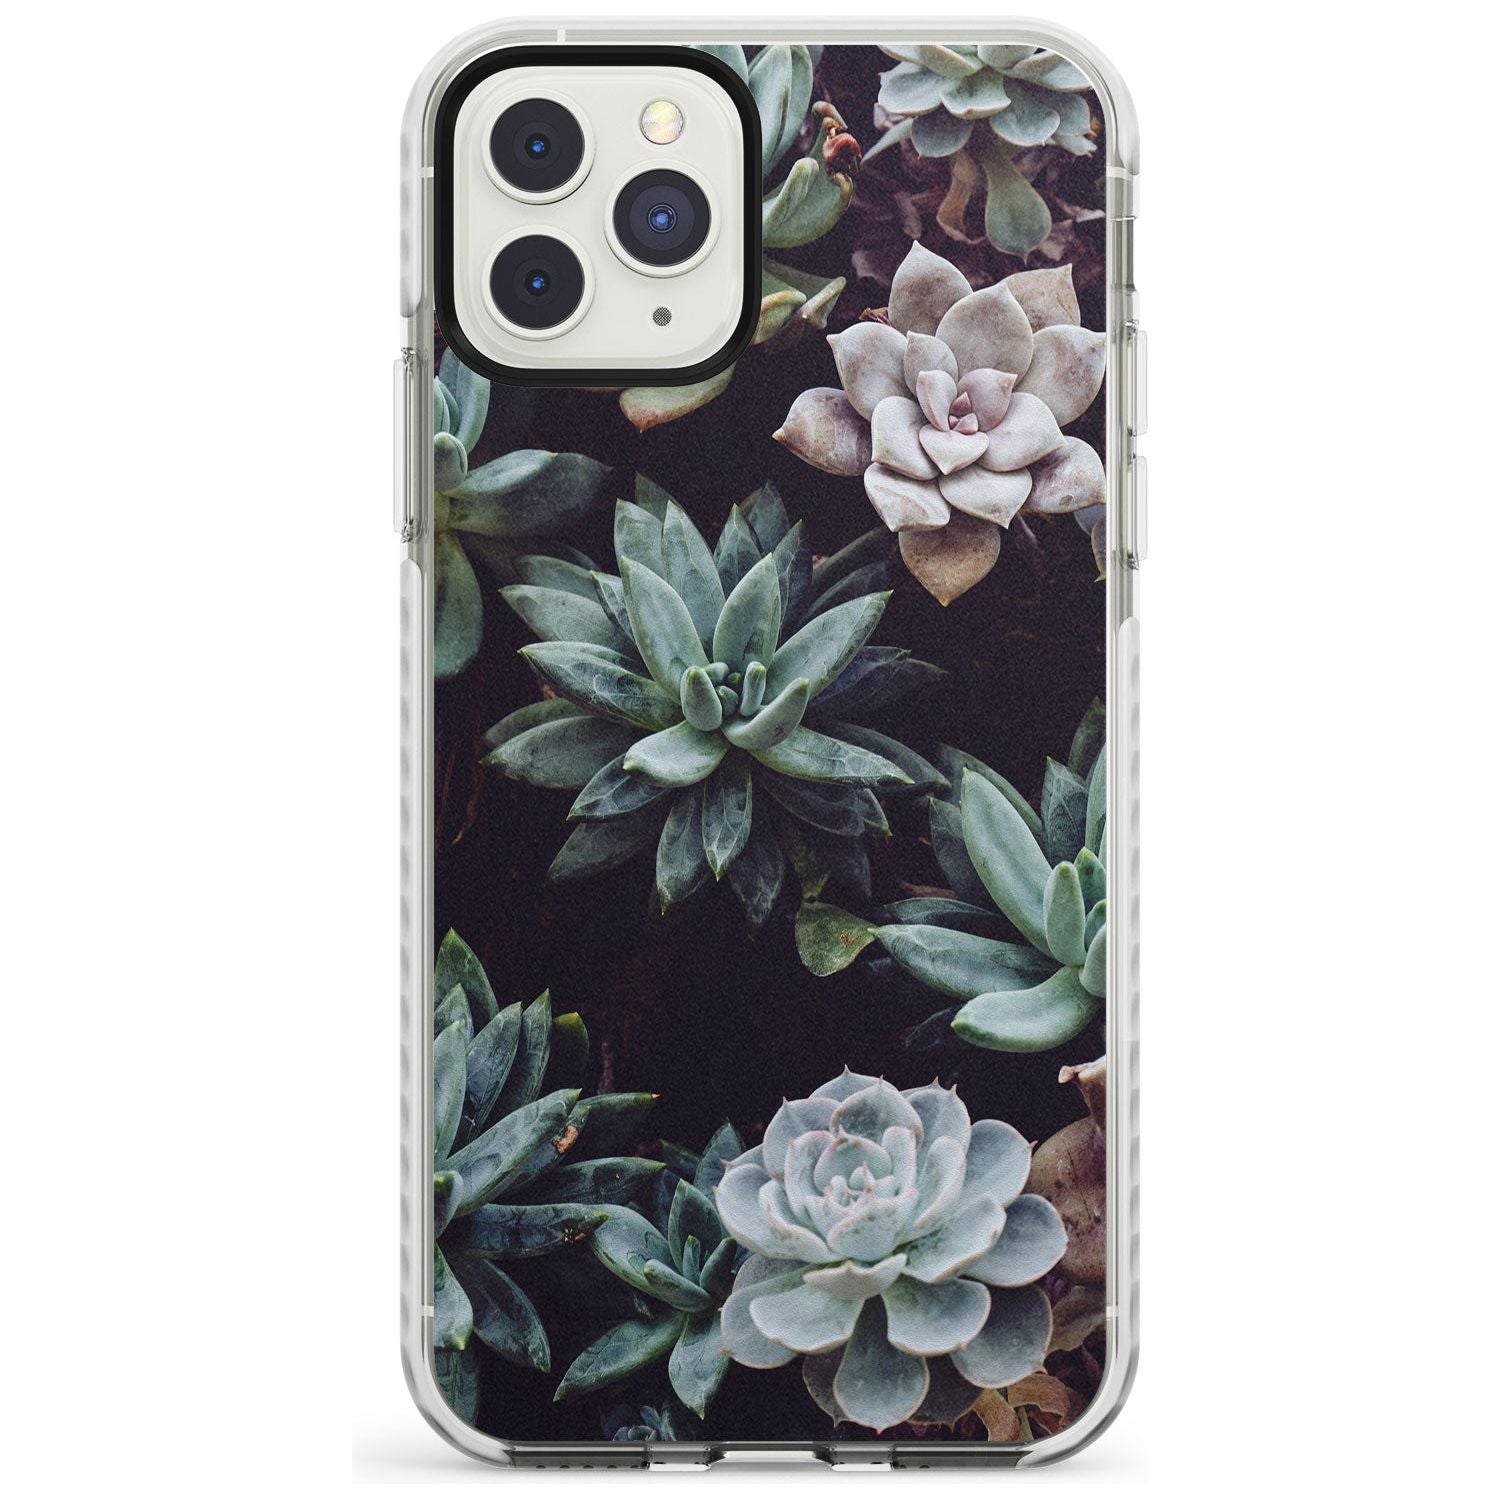 Mixed Succulents - Real Botanical Photographs Impact Phone Case for iPhone 11 Pro Max